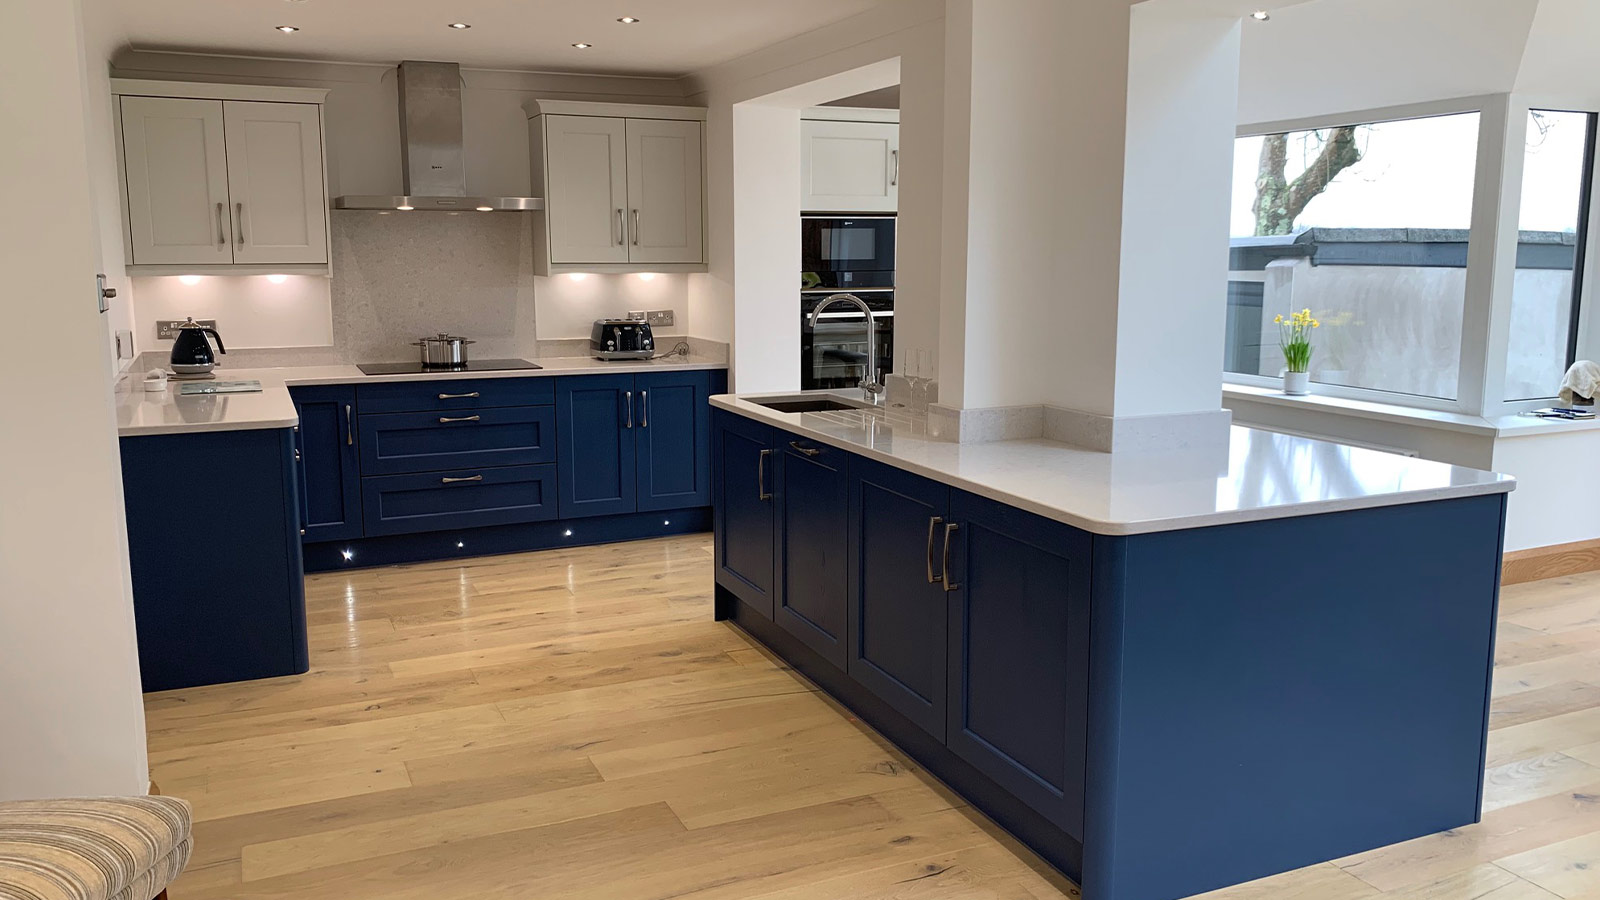 Classic shaker kitcehn with blue kitchen cabinets